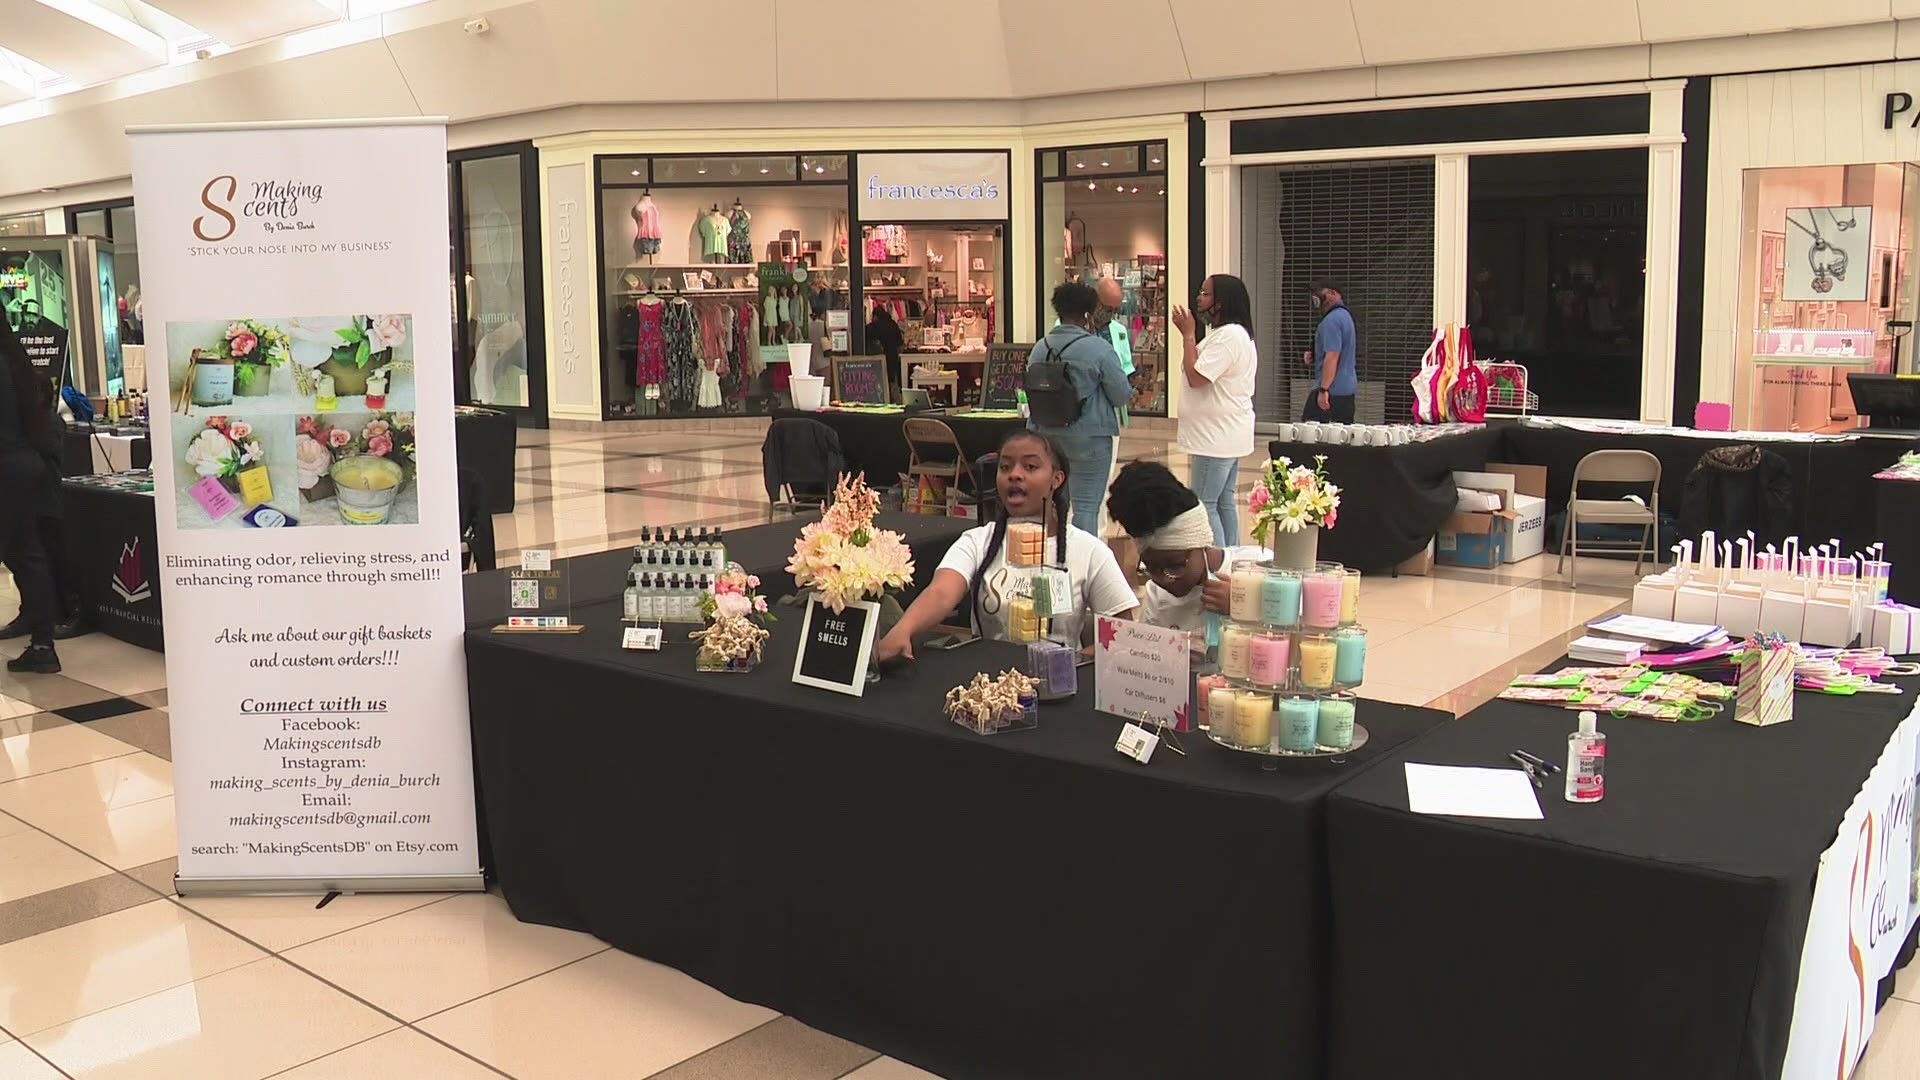 The event took place at Woodland Mall and featured 30 local businesses.